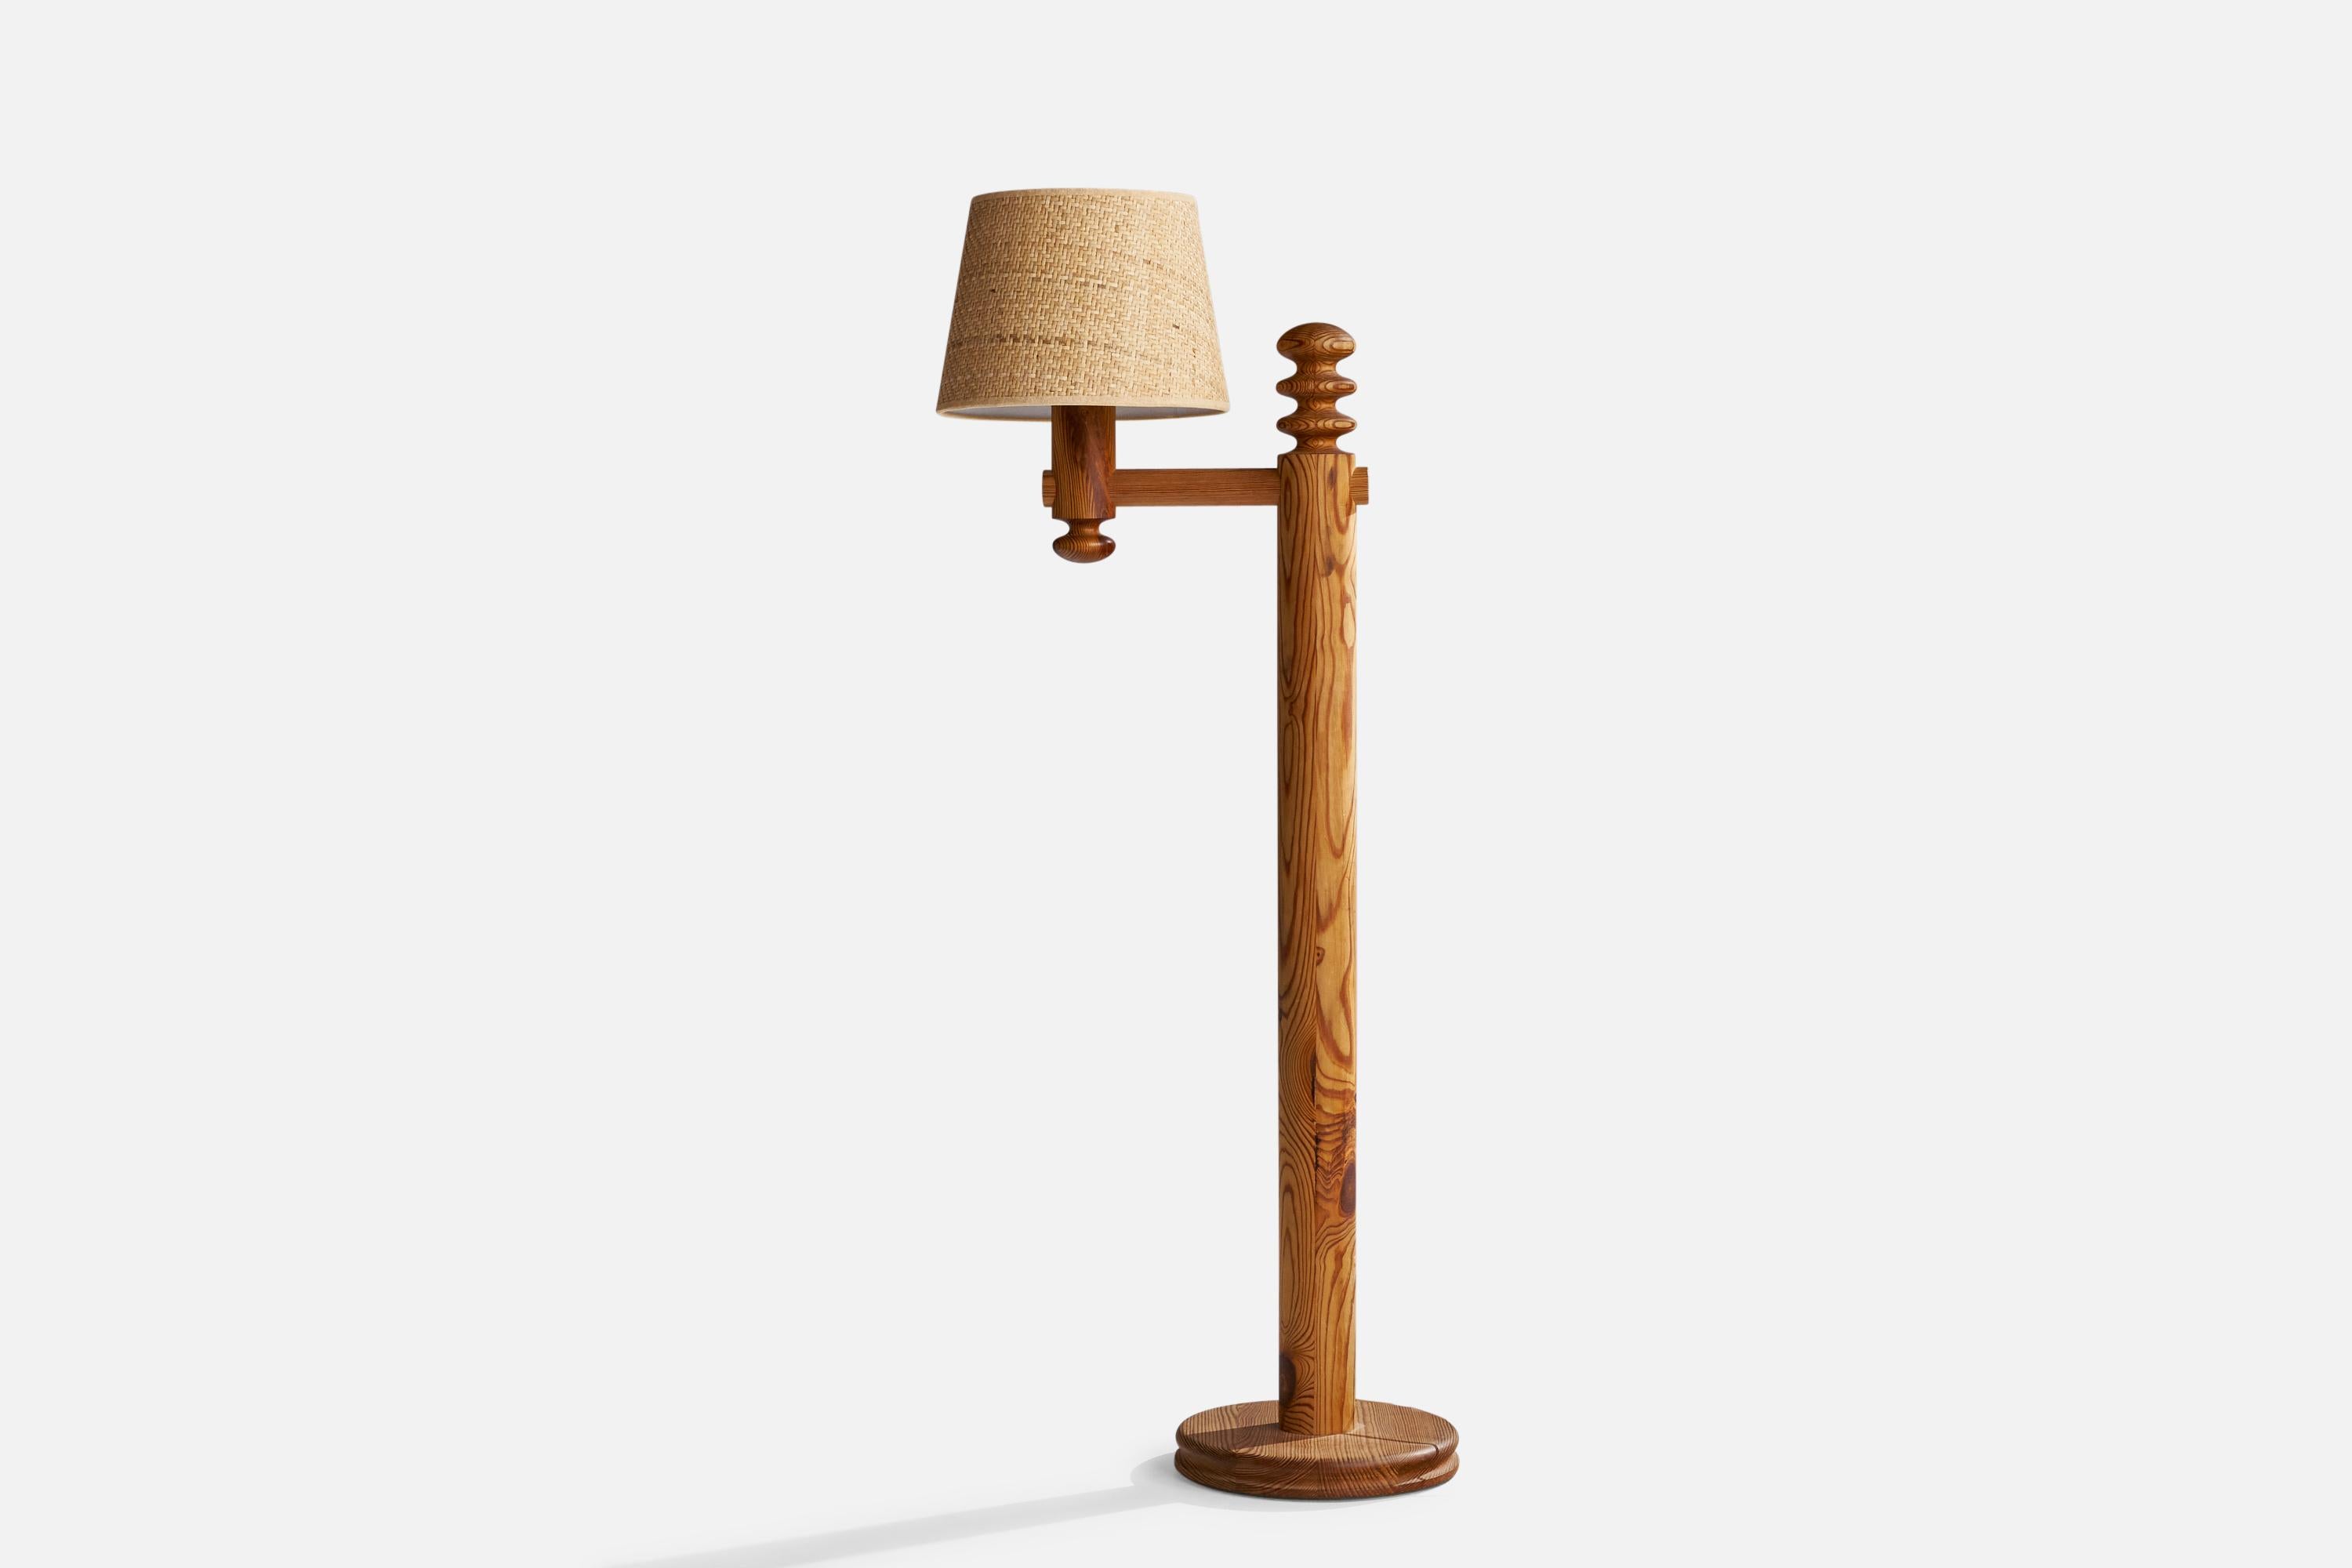 A pine and rattan floor lamp designed by Uno and Östen Kristiansson an produced by Luxus, Vittsjö, Sweden, 1970s.

Overall Dimensions (inches): 54” H x 12” W x 23” D
Stated dimensions include shade.
Bulb Specifications: E-26 Bulb
Number of Sockets: